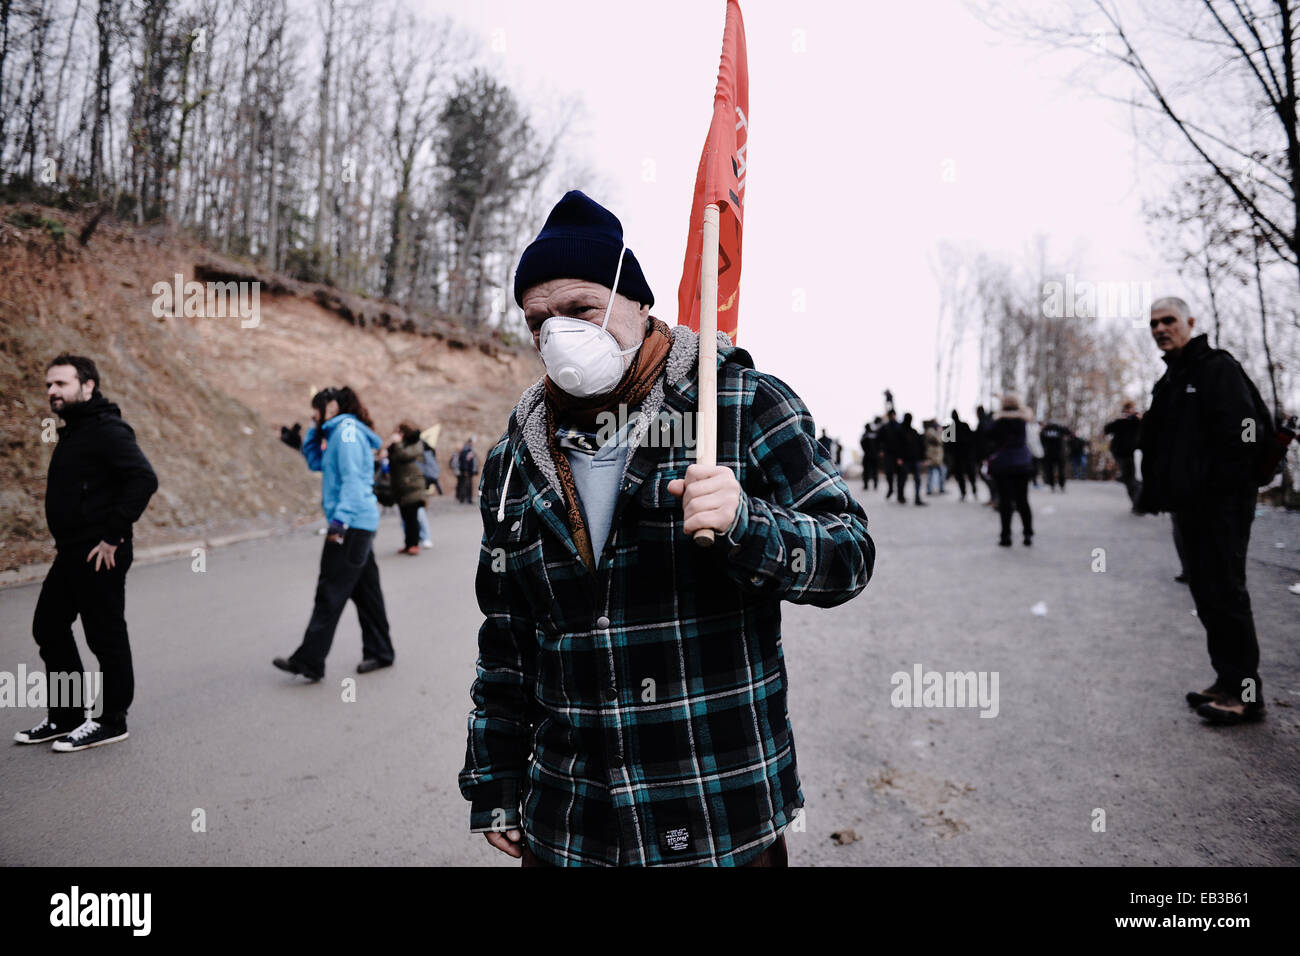 Residents of Chalkidiki's villages, clash with police during a demonstration against the operation of gold mines in the nearby area of Skouries. Residents react against a possible environmental disaster caused by the gold mining project. Stock Photo